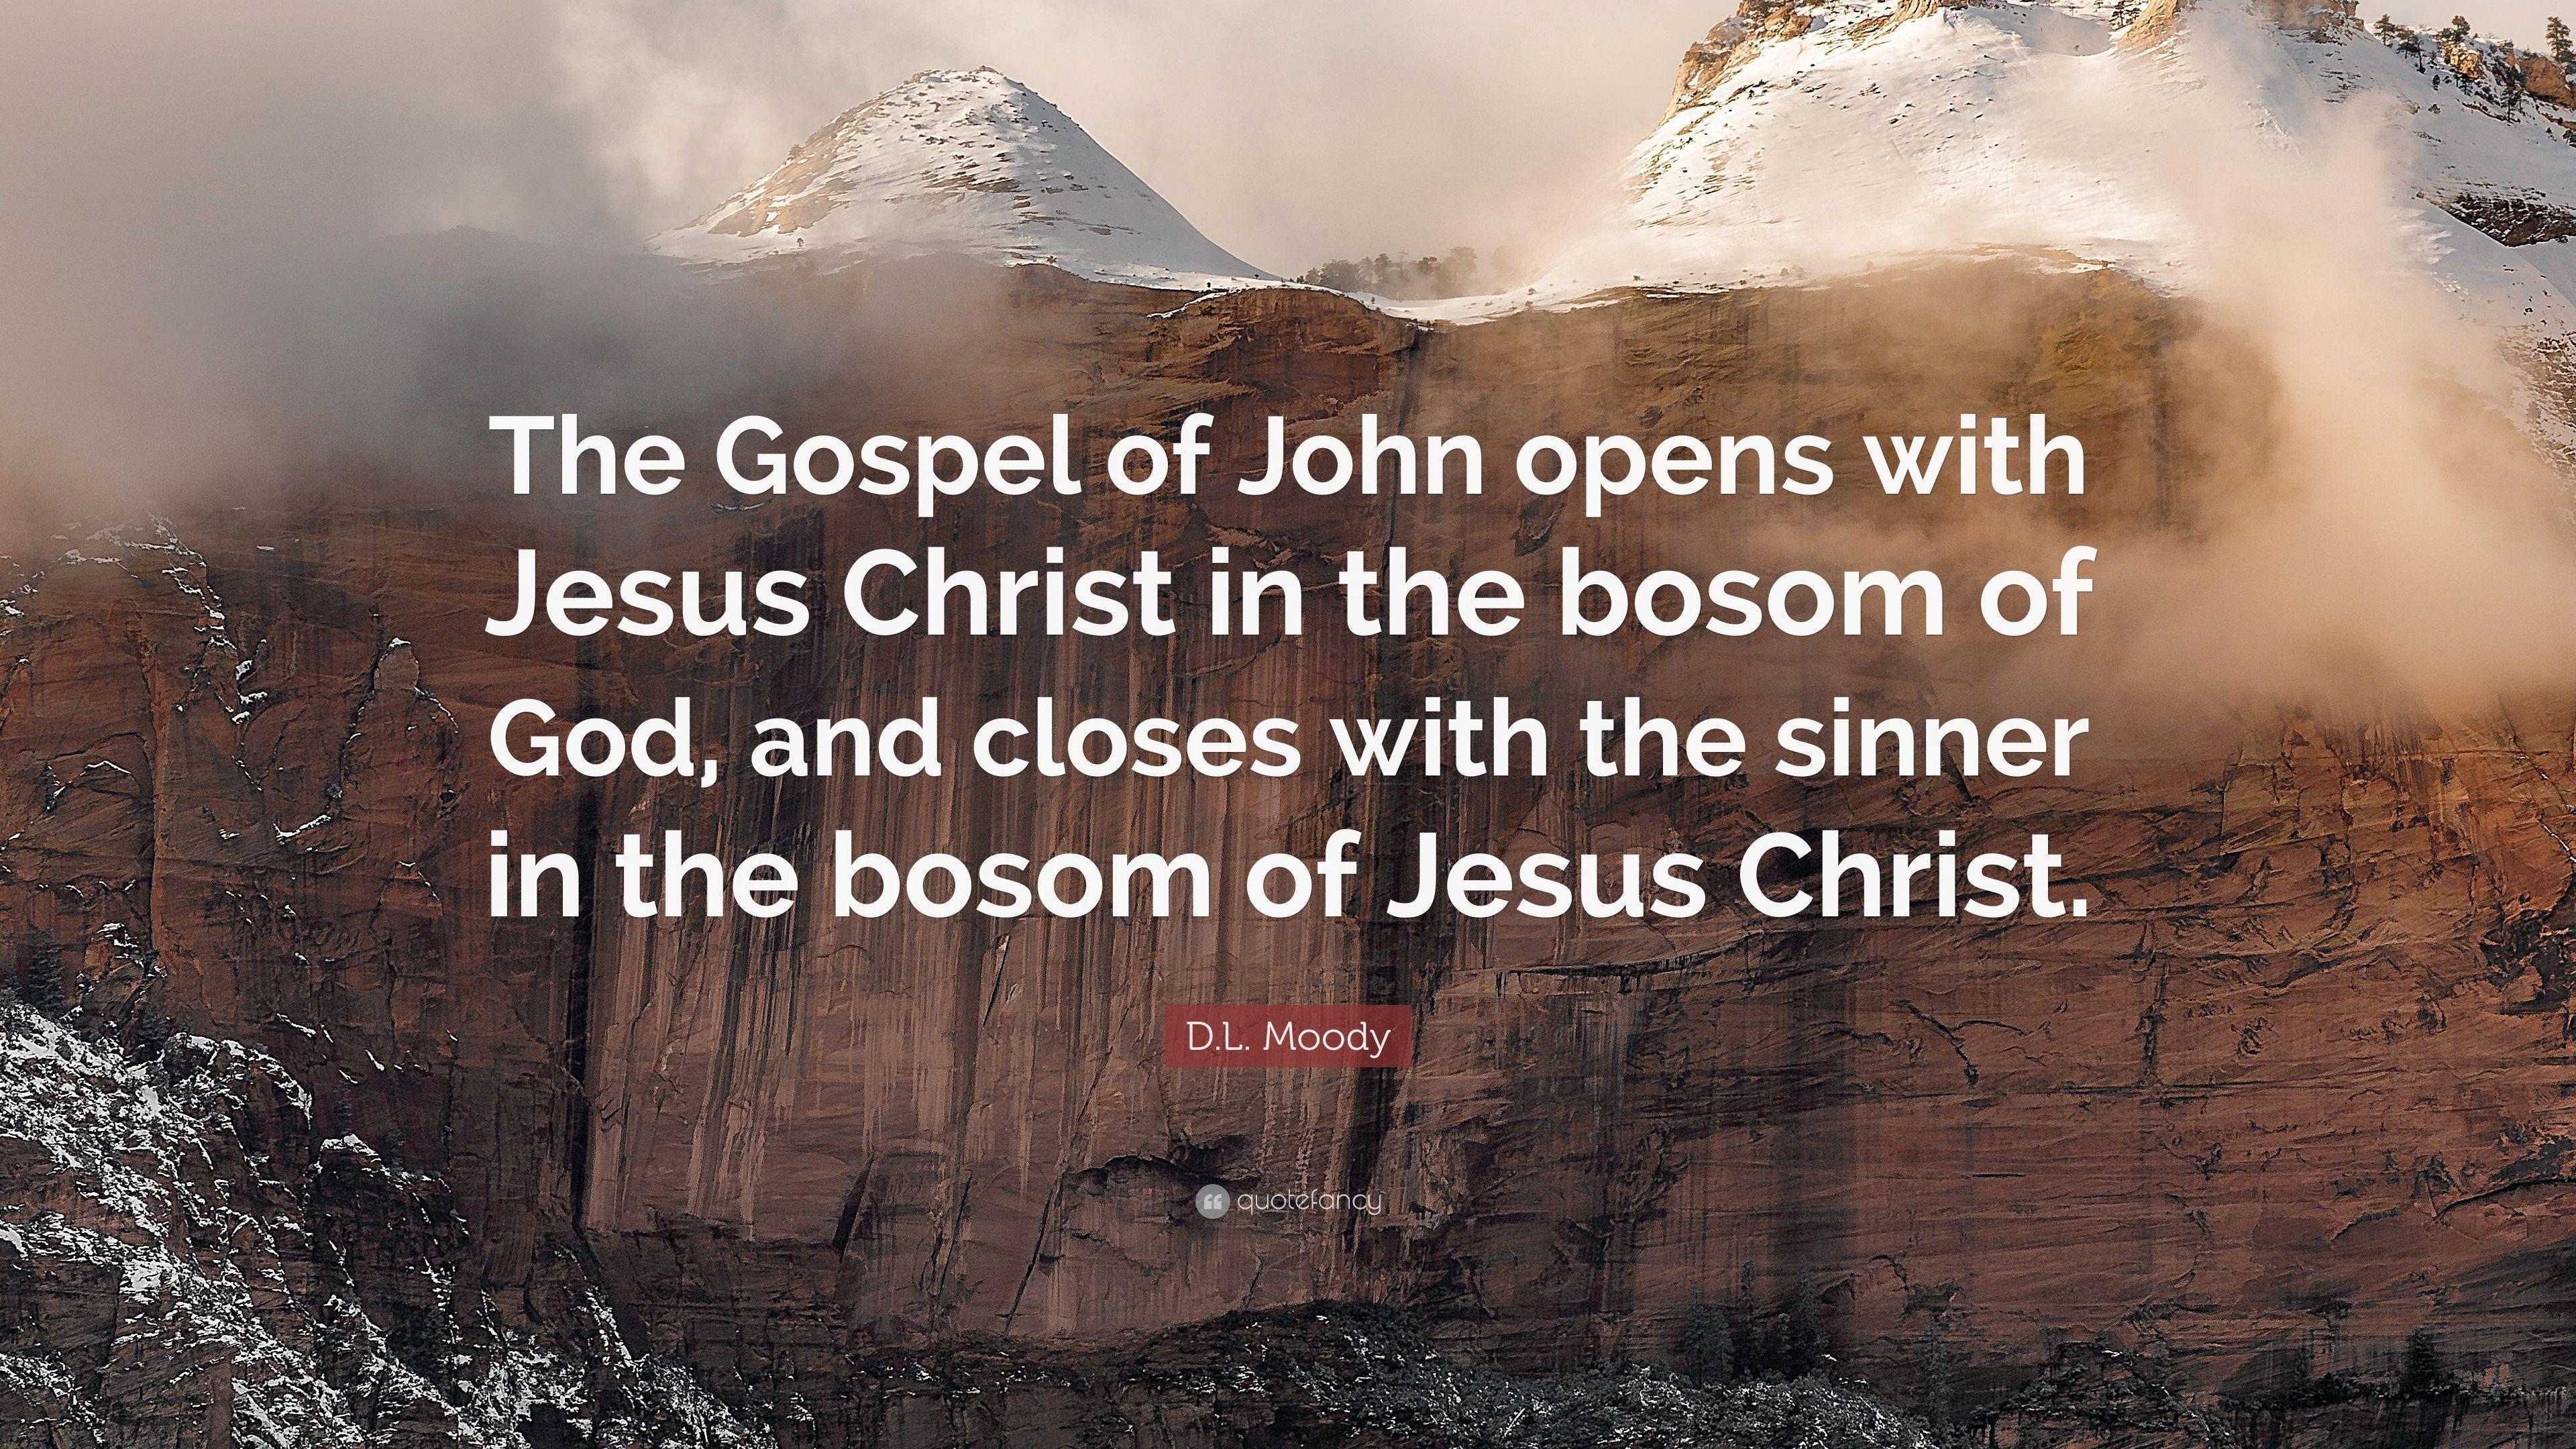 D.L. Moody Quote: “The Gospel of John opens with Jesus Christ